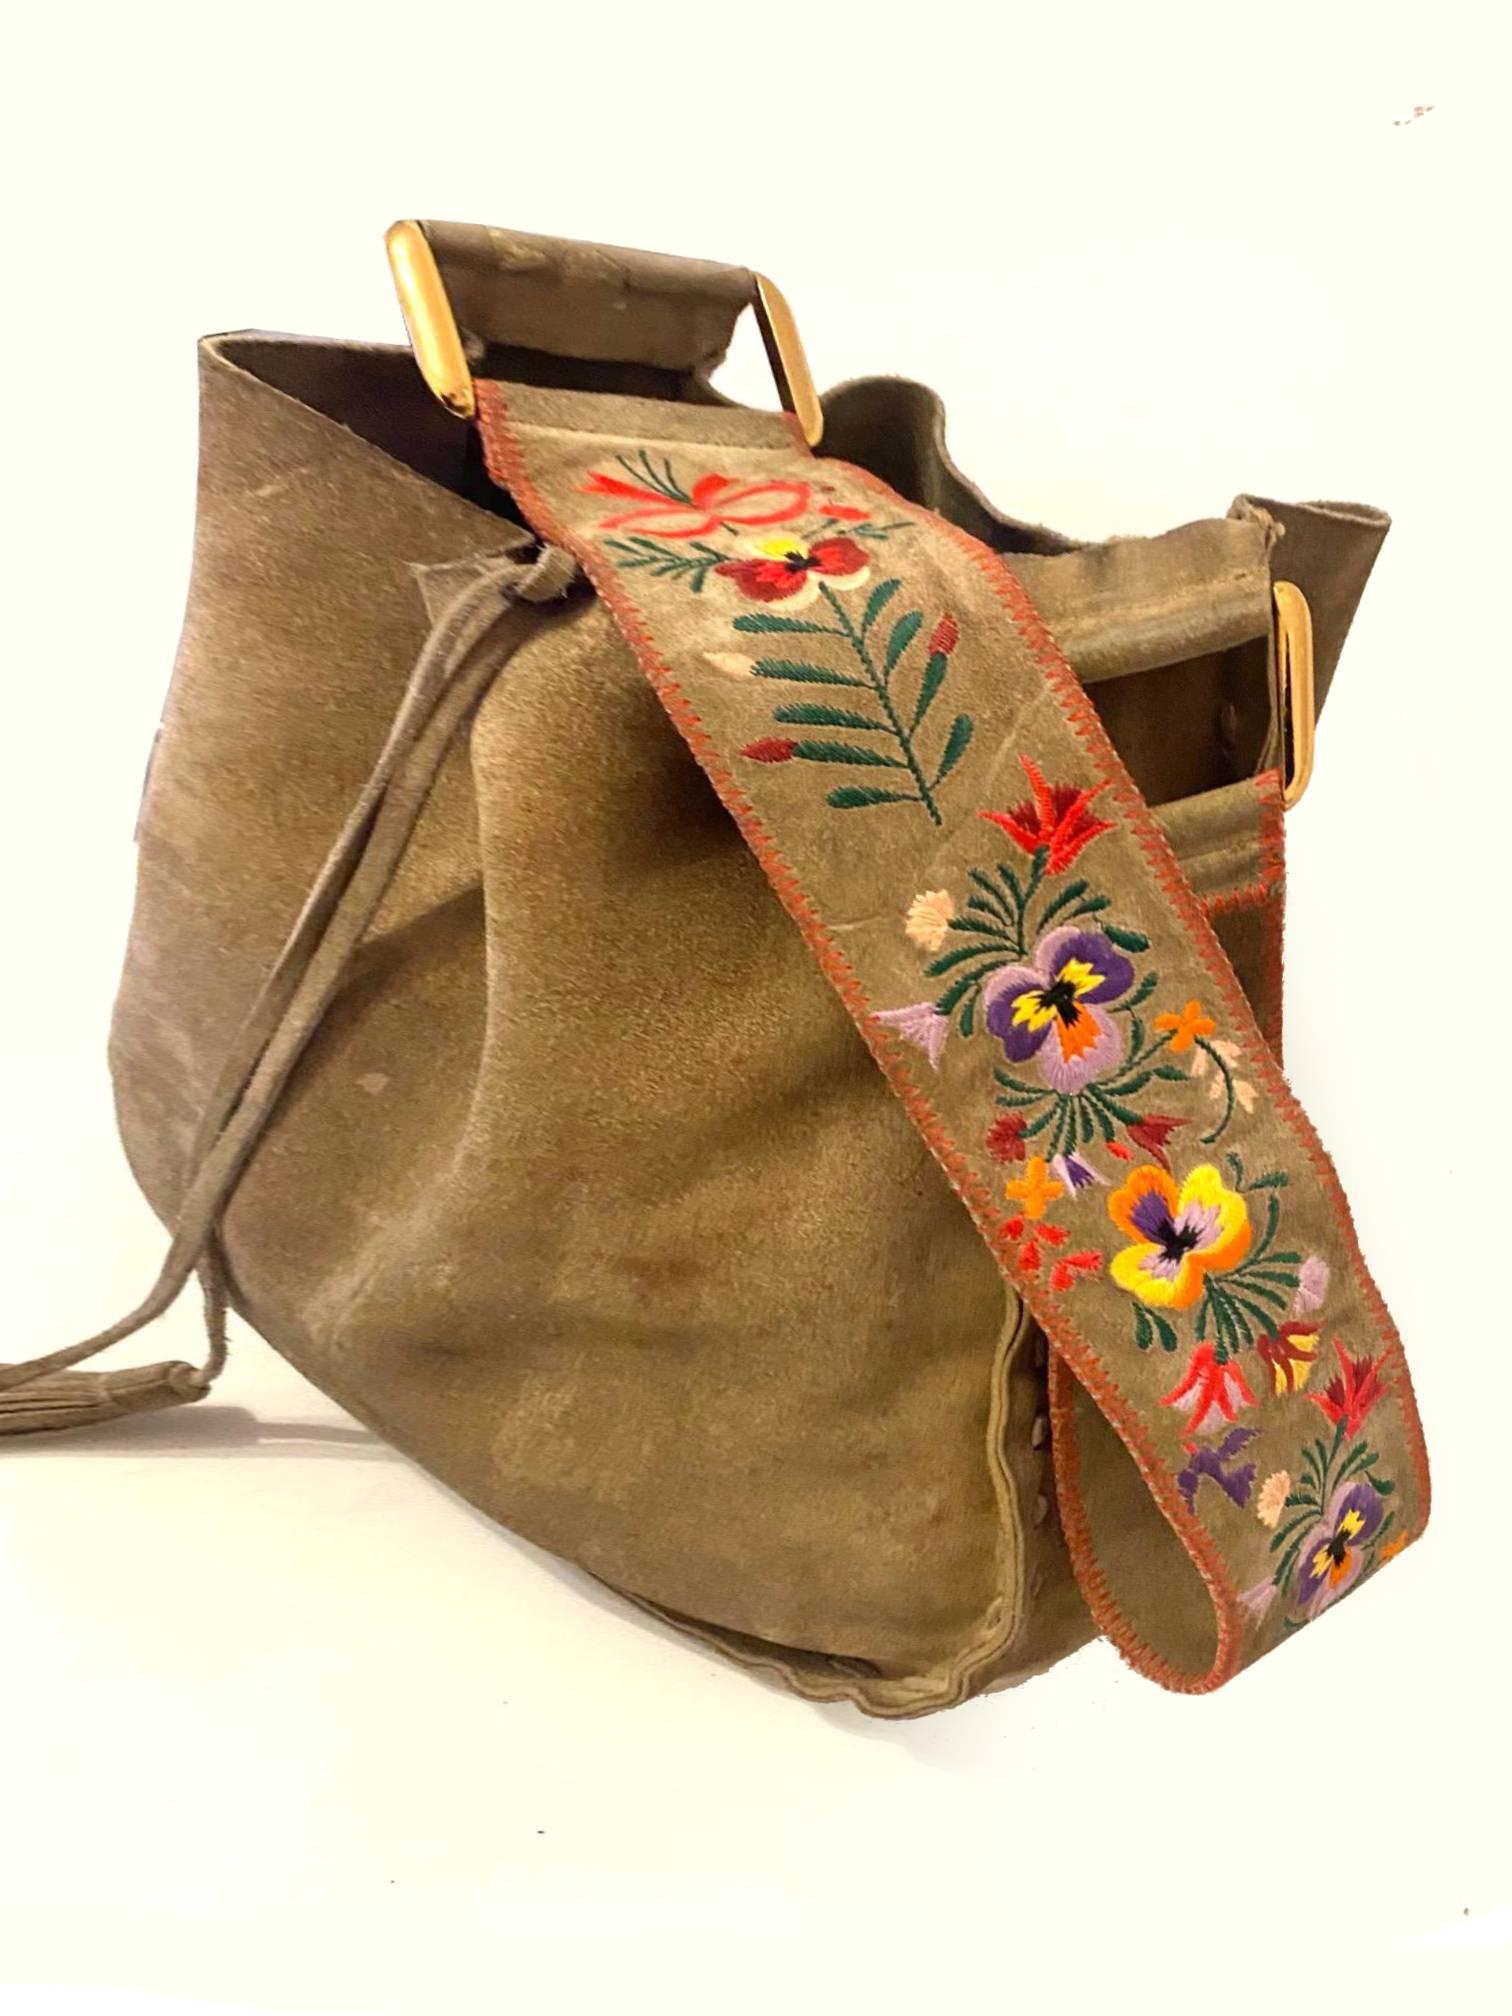 This luxurious and timeless piece from the 1990s by Miu Miu is delightfully crafted from soft suede with blooming embroidered florals on its shoulder strap.

Condition: vintage, 1990s, shows light signs of wear here and there and the bottom as shown